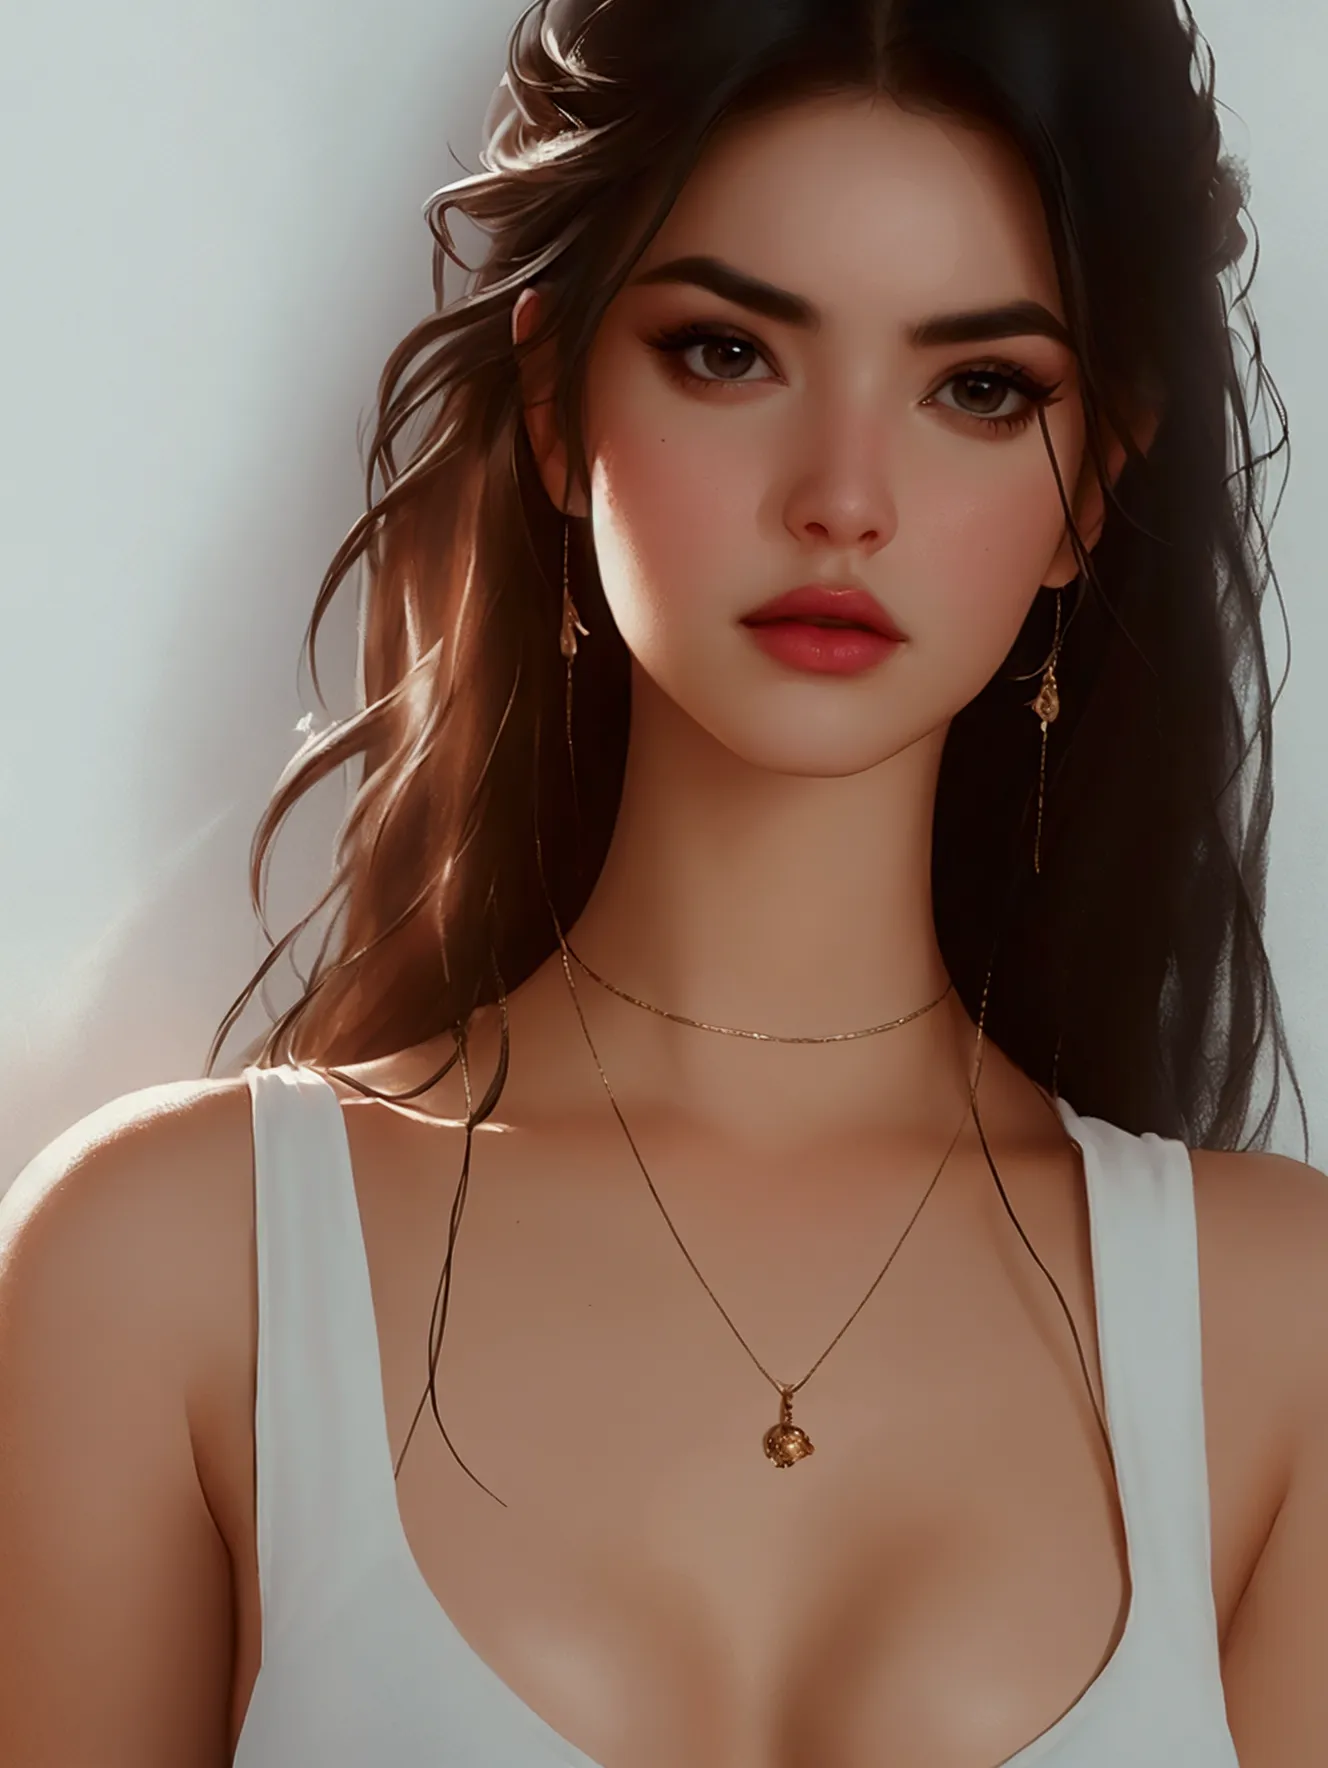 Susana Abaitua, using the best shadow and lighting techniques, to create a mesmerizing portrait that transcends the visual,
ultr...